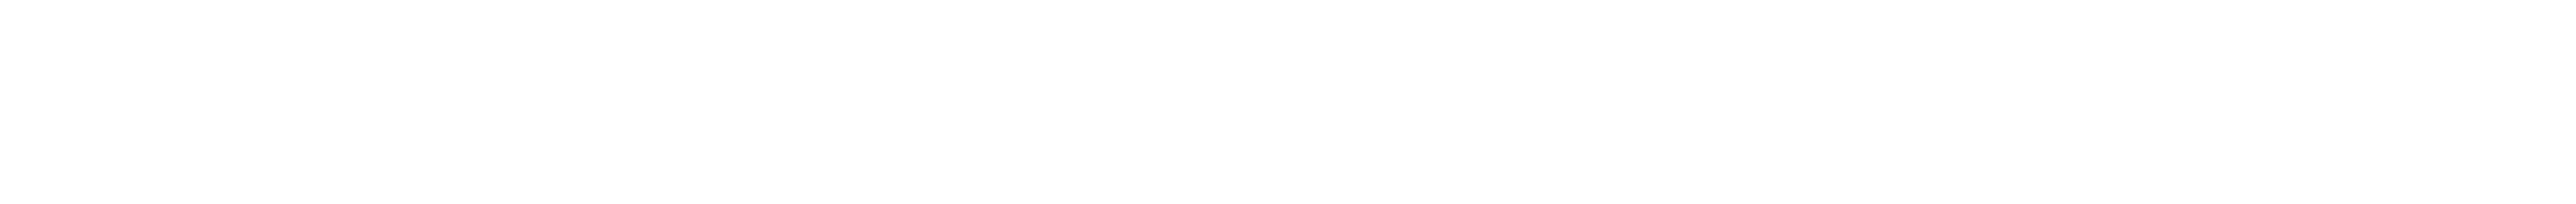 Abdulla Fouad For Medical Supplies & Services